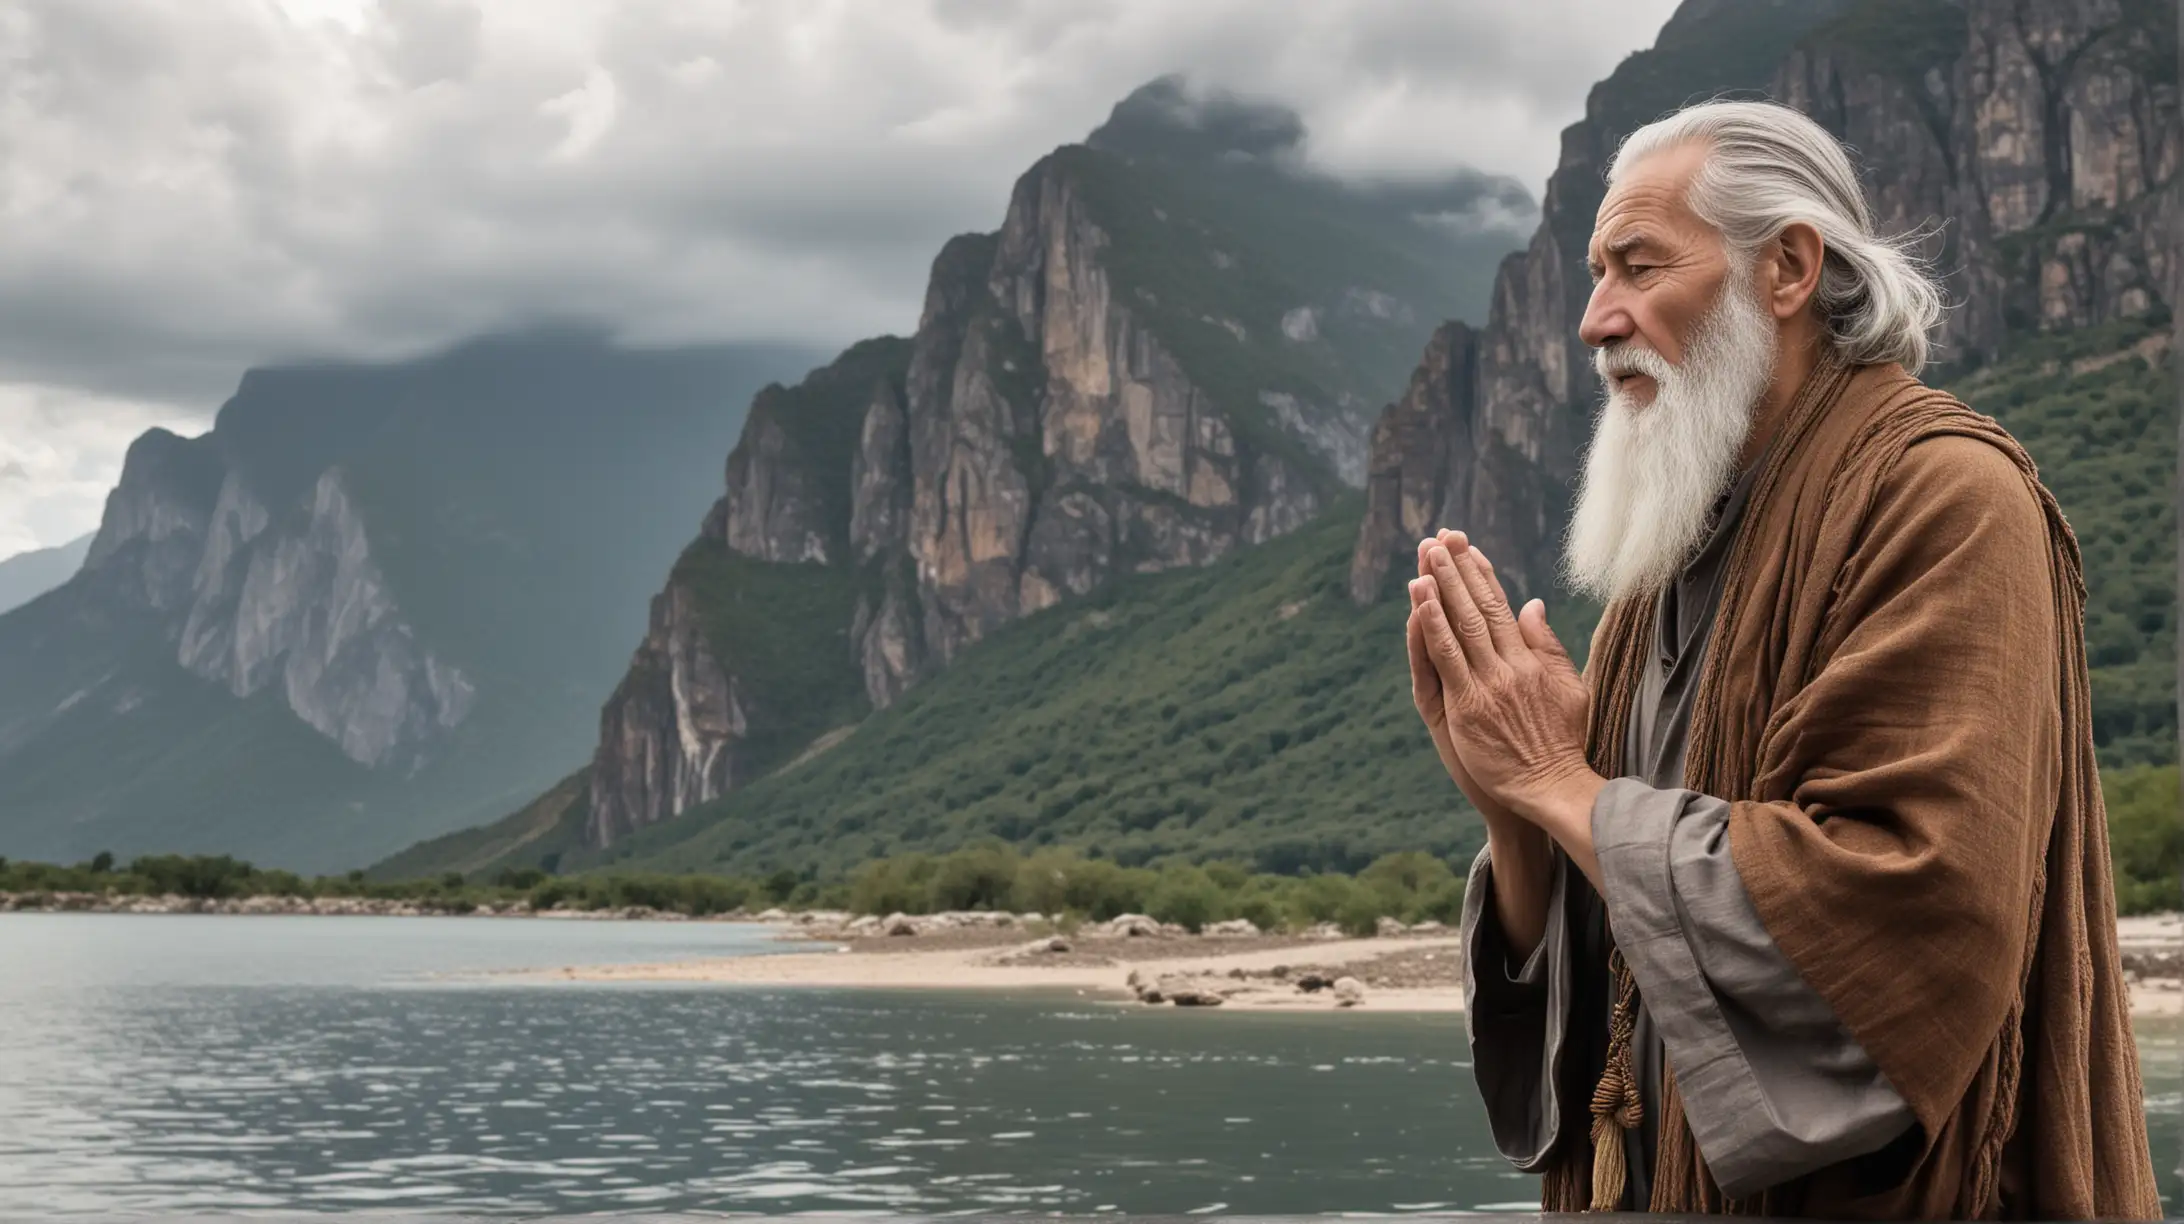 An old man with a long beard and grey hair is praying with his hands clasped. He is wearing a brown shawl around his shoulders. He is standing in front of a body of water with mountains in the background. The sky is filled with clouds.